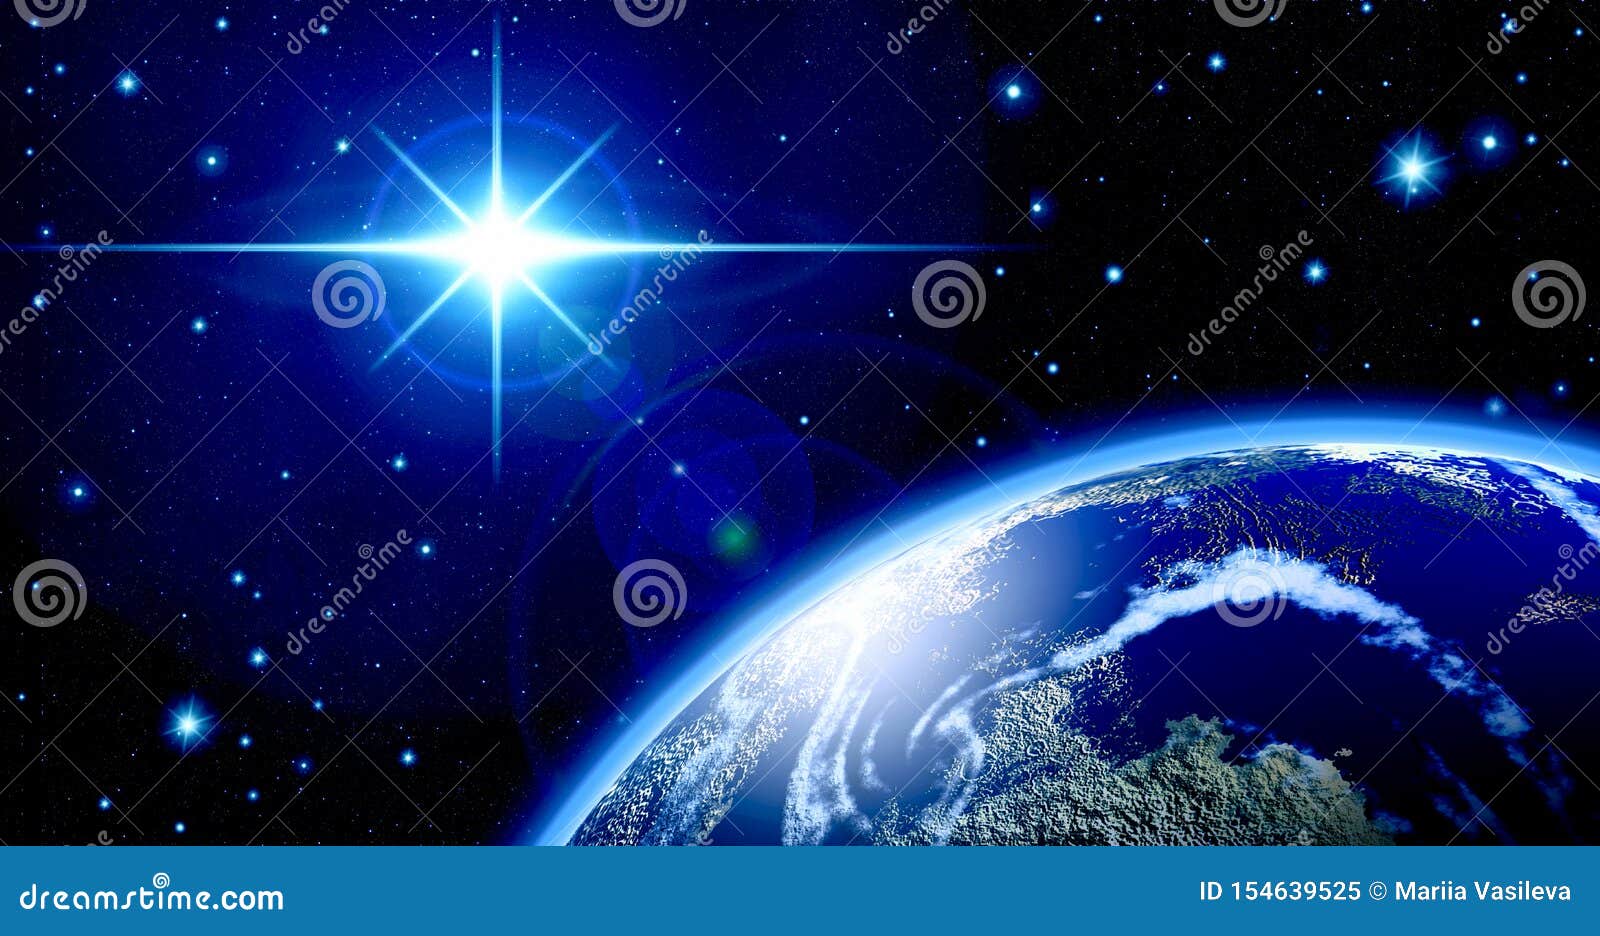 blue star radiance, space, stars, rays, brilliance, planet, astronomy, science, starry sky, universe, brilliance, flaming